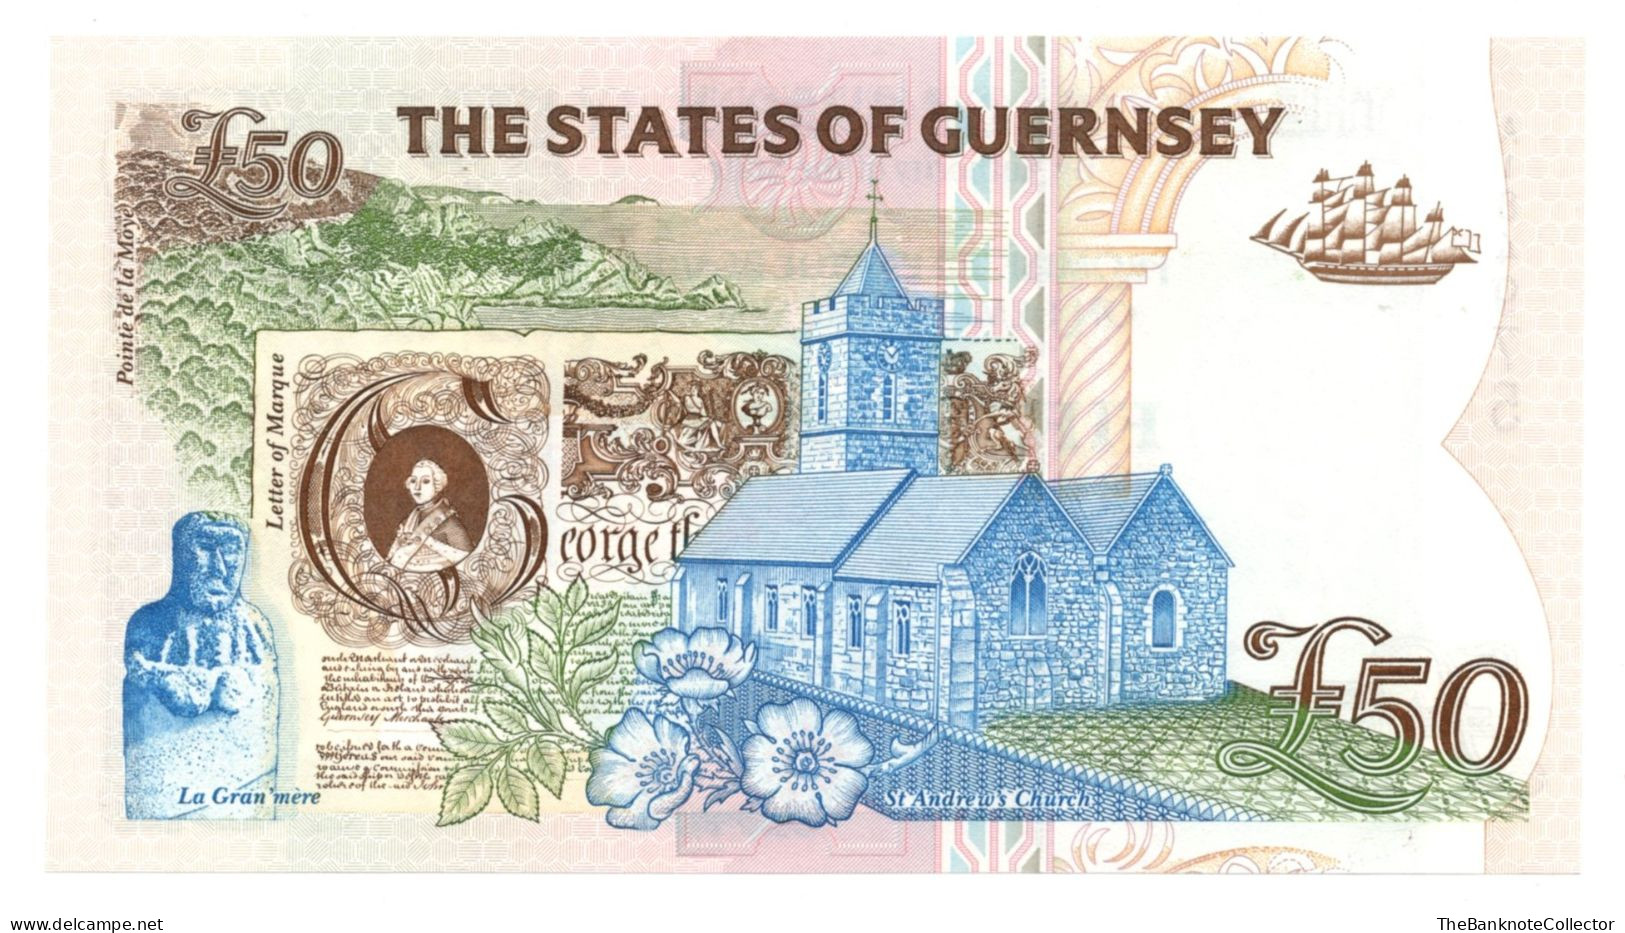 Guernsey 50 Pounds ND1994 QEII P-59 UNC - Guernesey